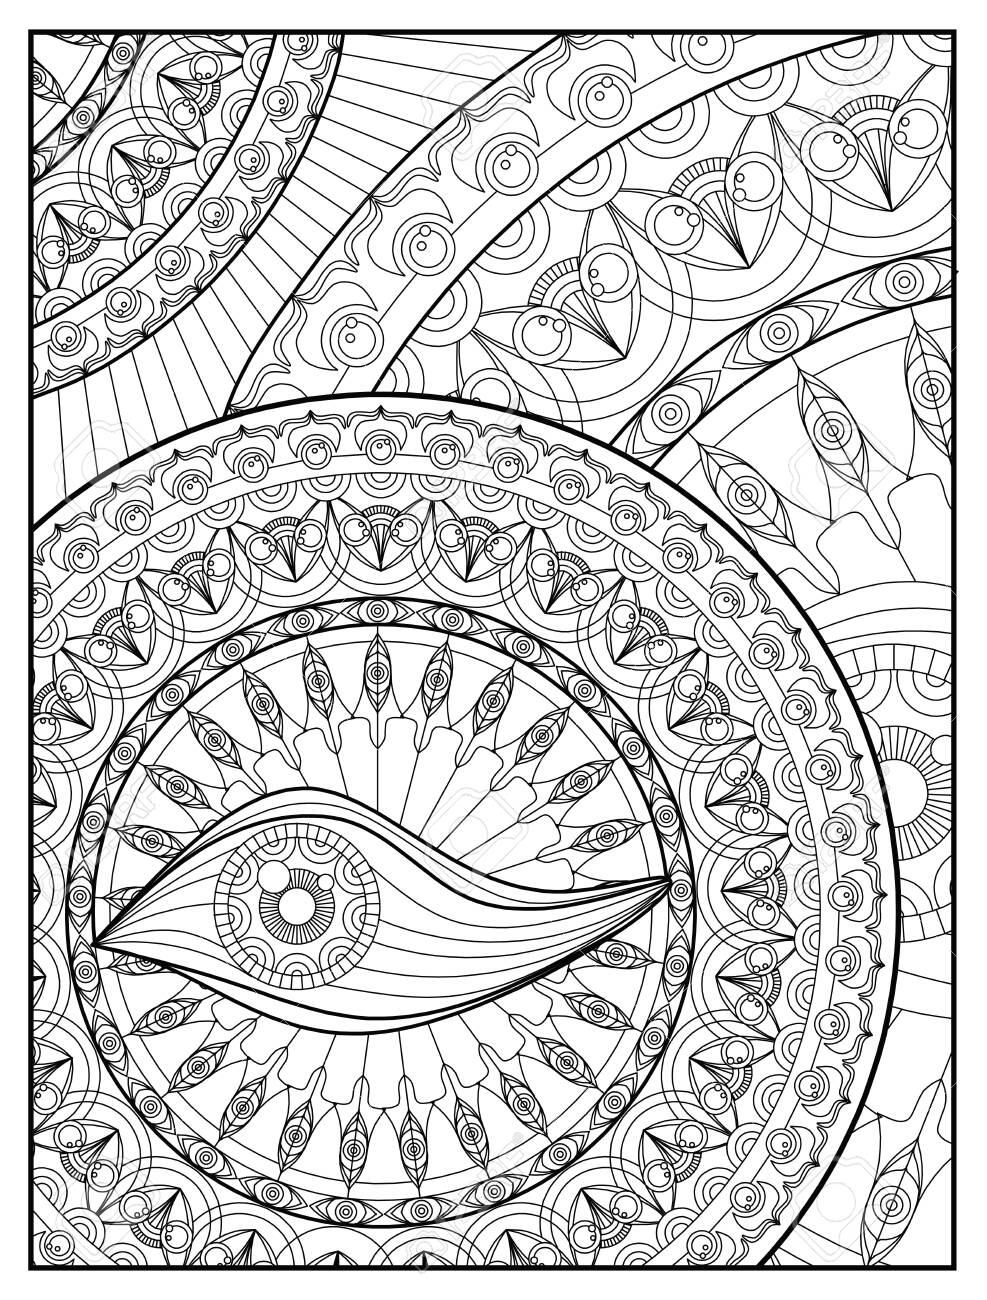 Coloring Page : Mandala Coloring Page For Adult Relaxation Design